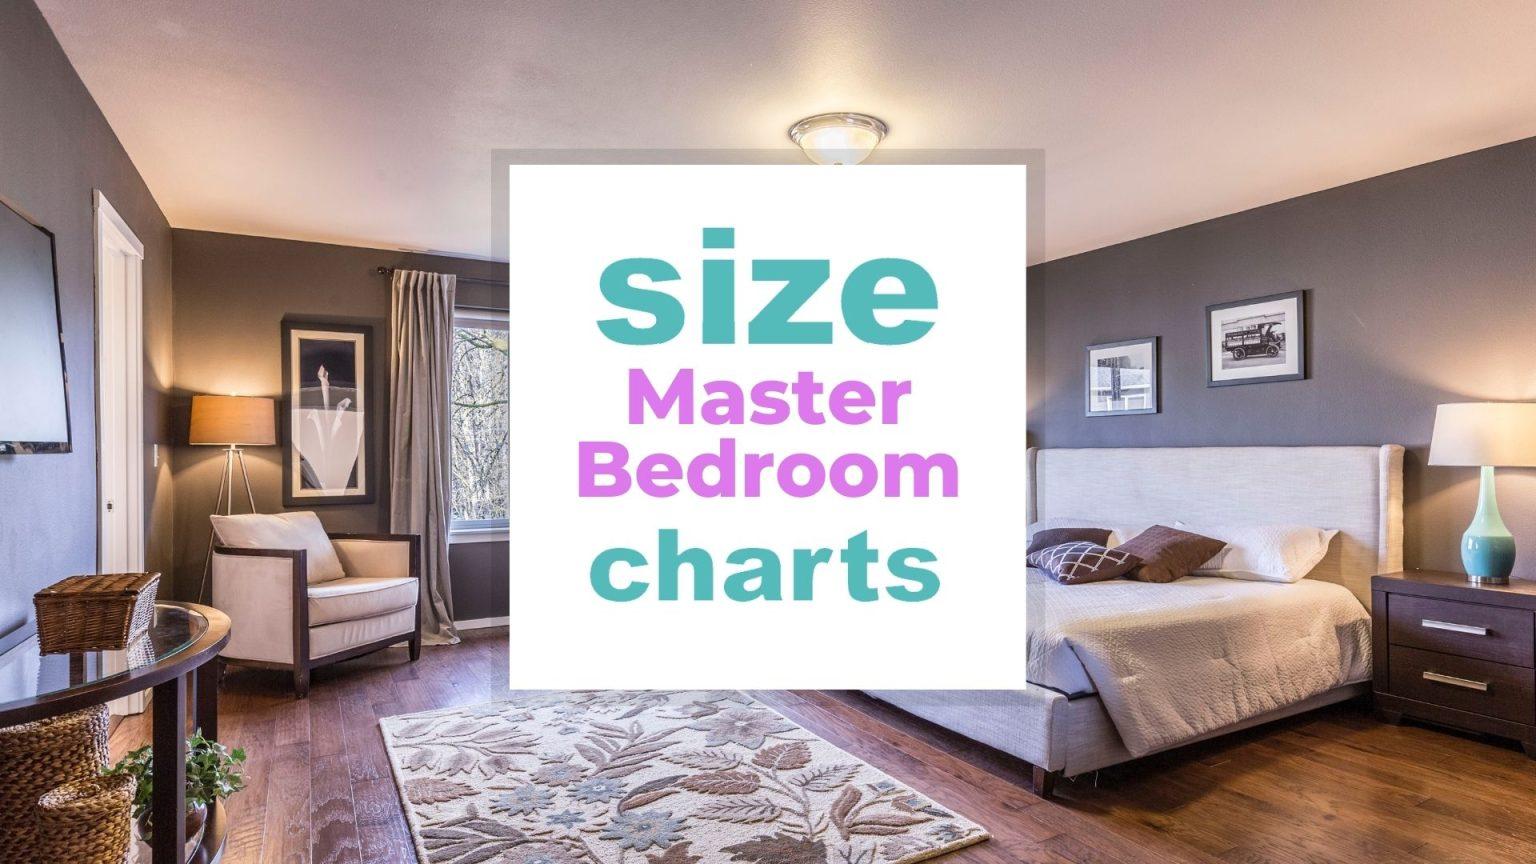 Average Master Bedroom Size How Big Is A Master Bedroom Size Charts.com  1536x864 